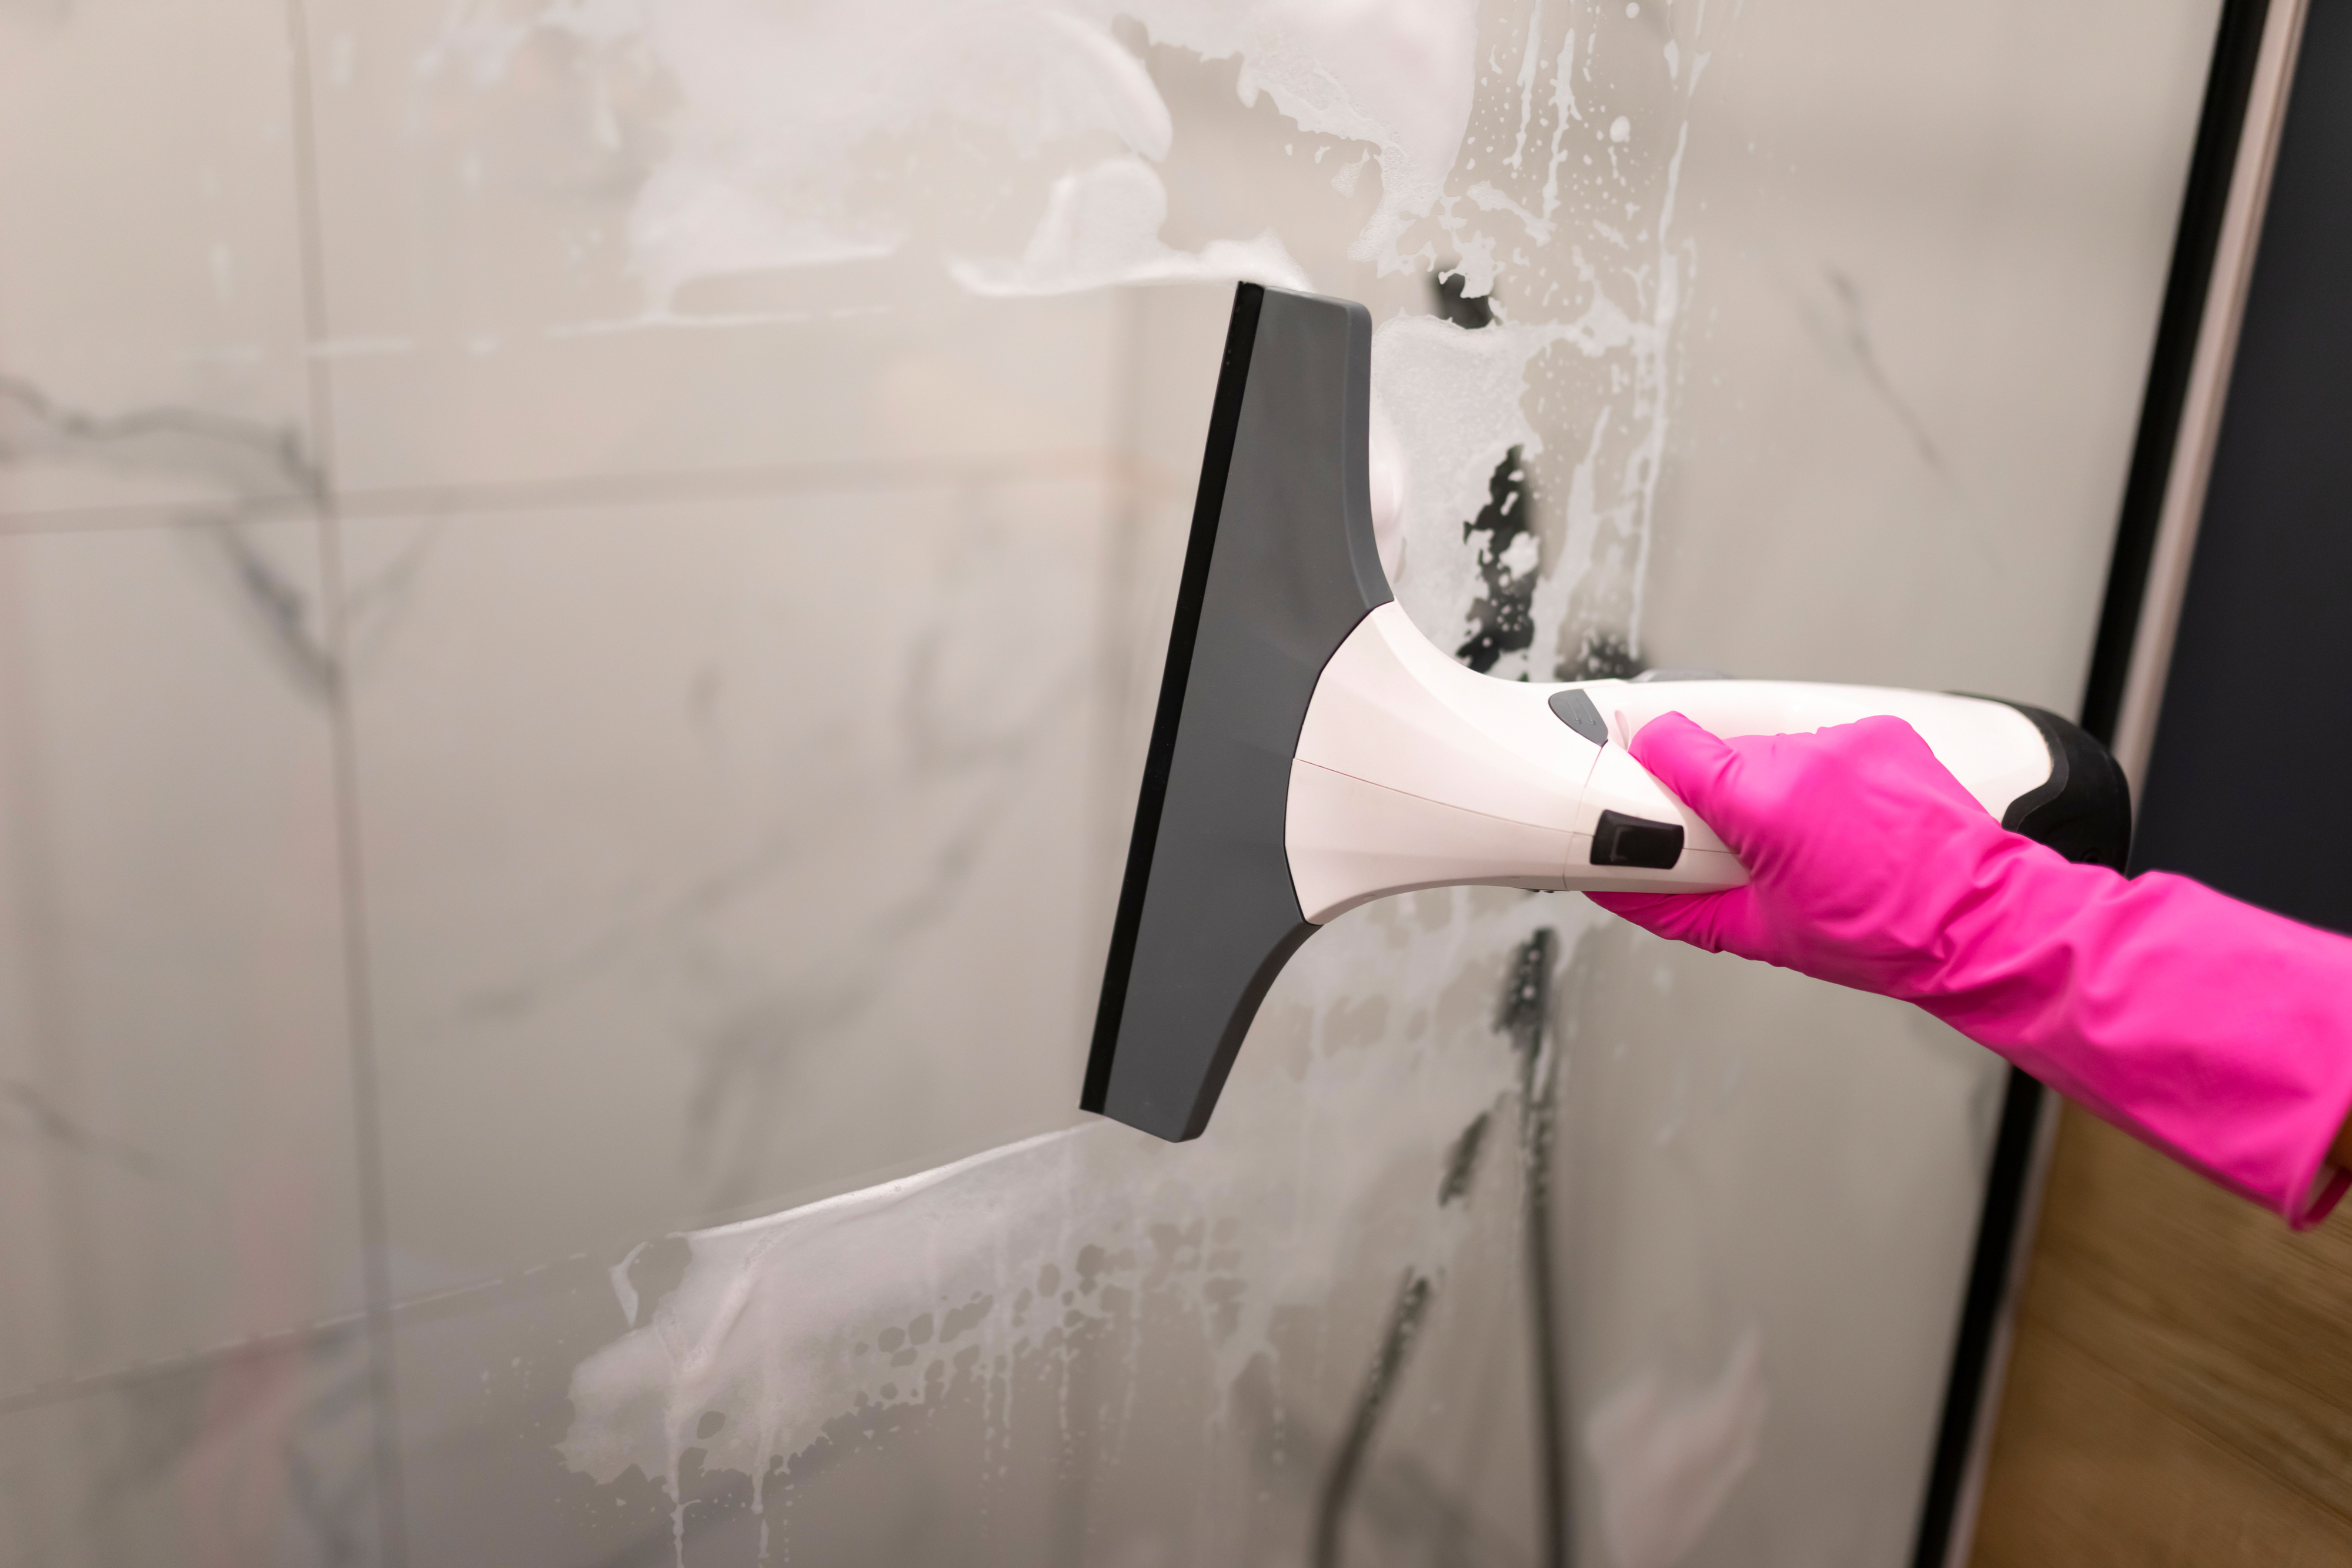 Hand in pink glove cleans a marble surface with a white and black squeegee